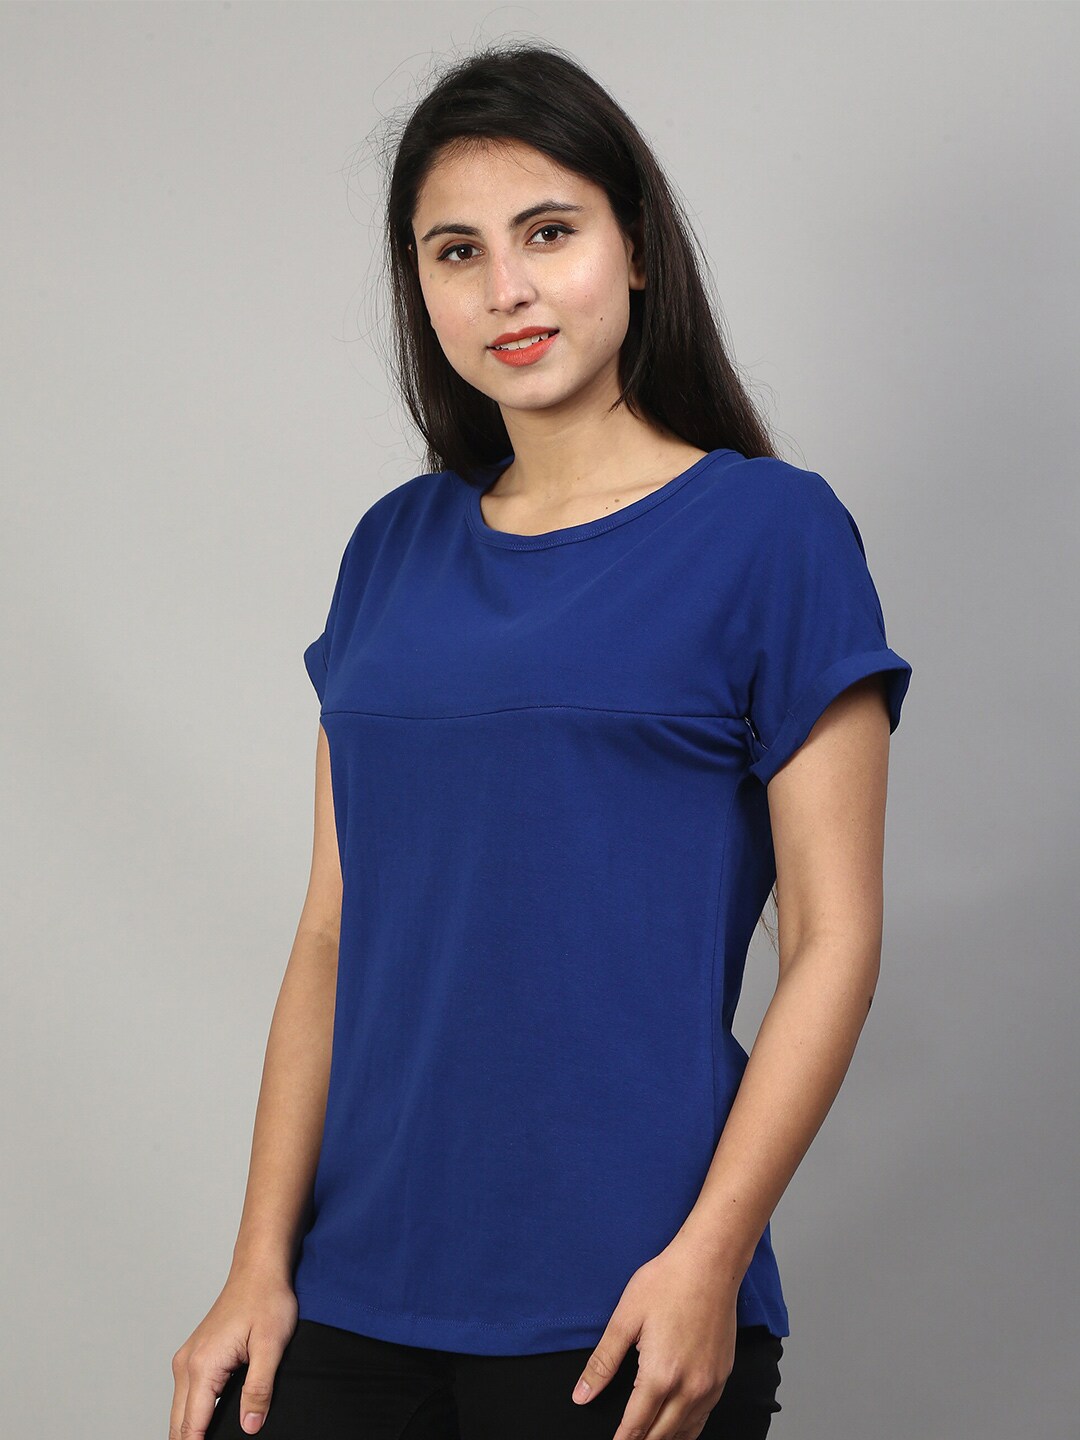 SillyBoom Round Neck Cotton Maternity T-shirt Price in India